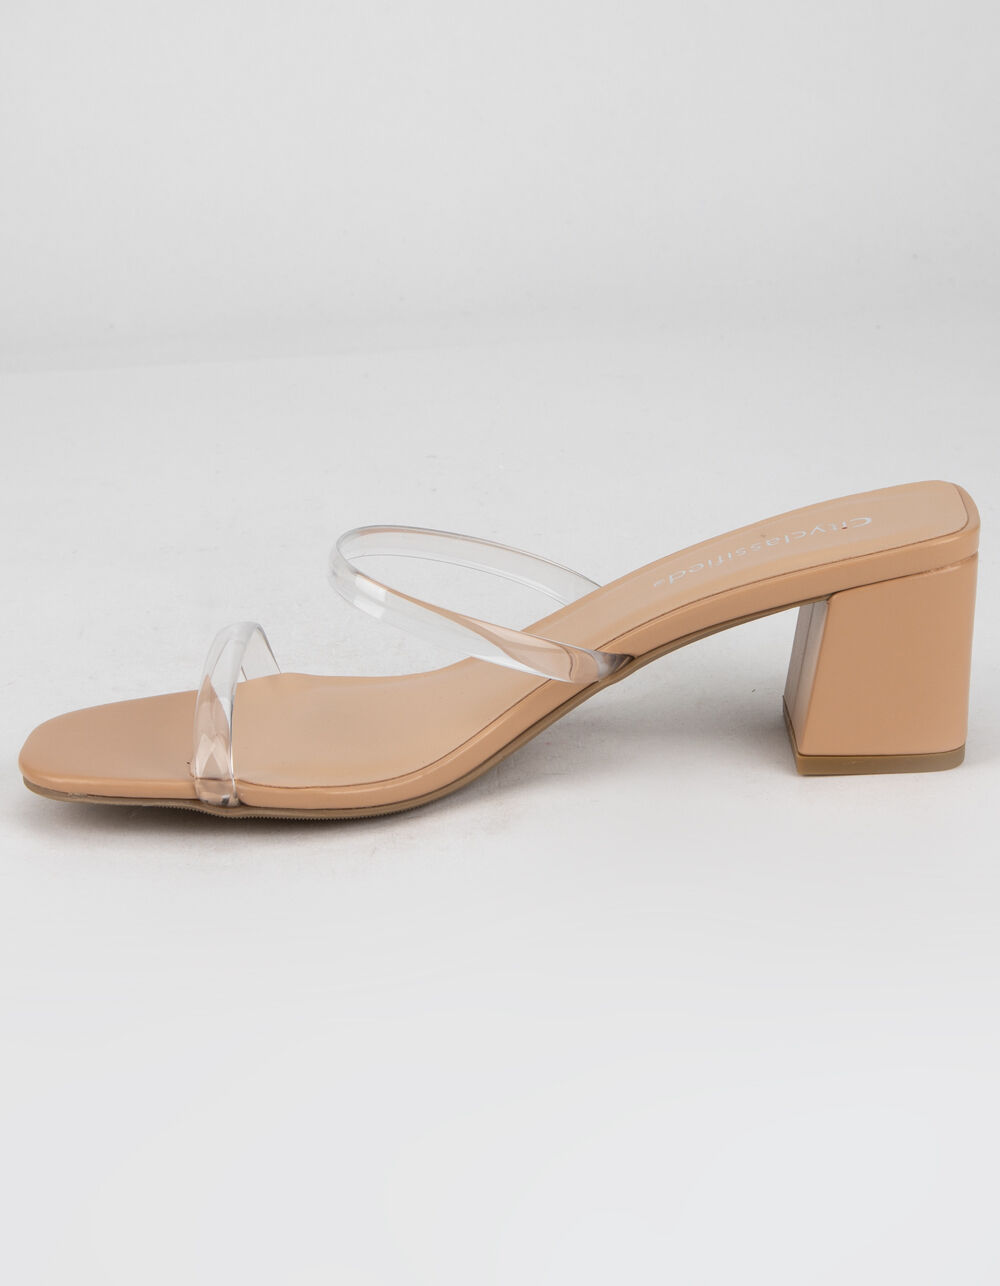 CITY CLASSIFIED Clear Two Strap Womens Nude Heels - NUDE | Tillys